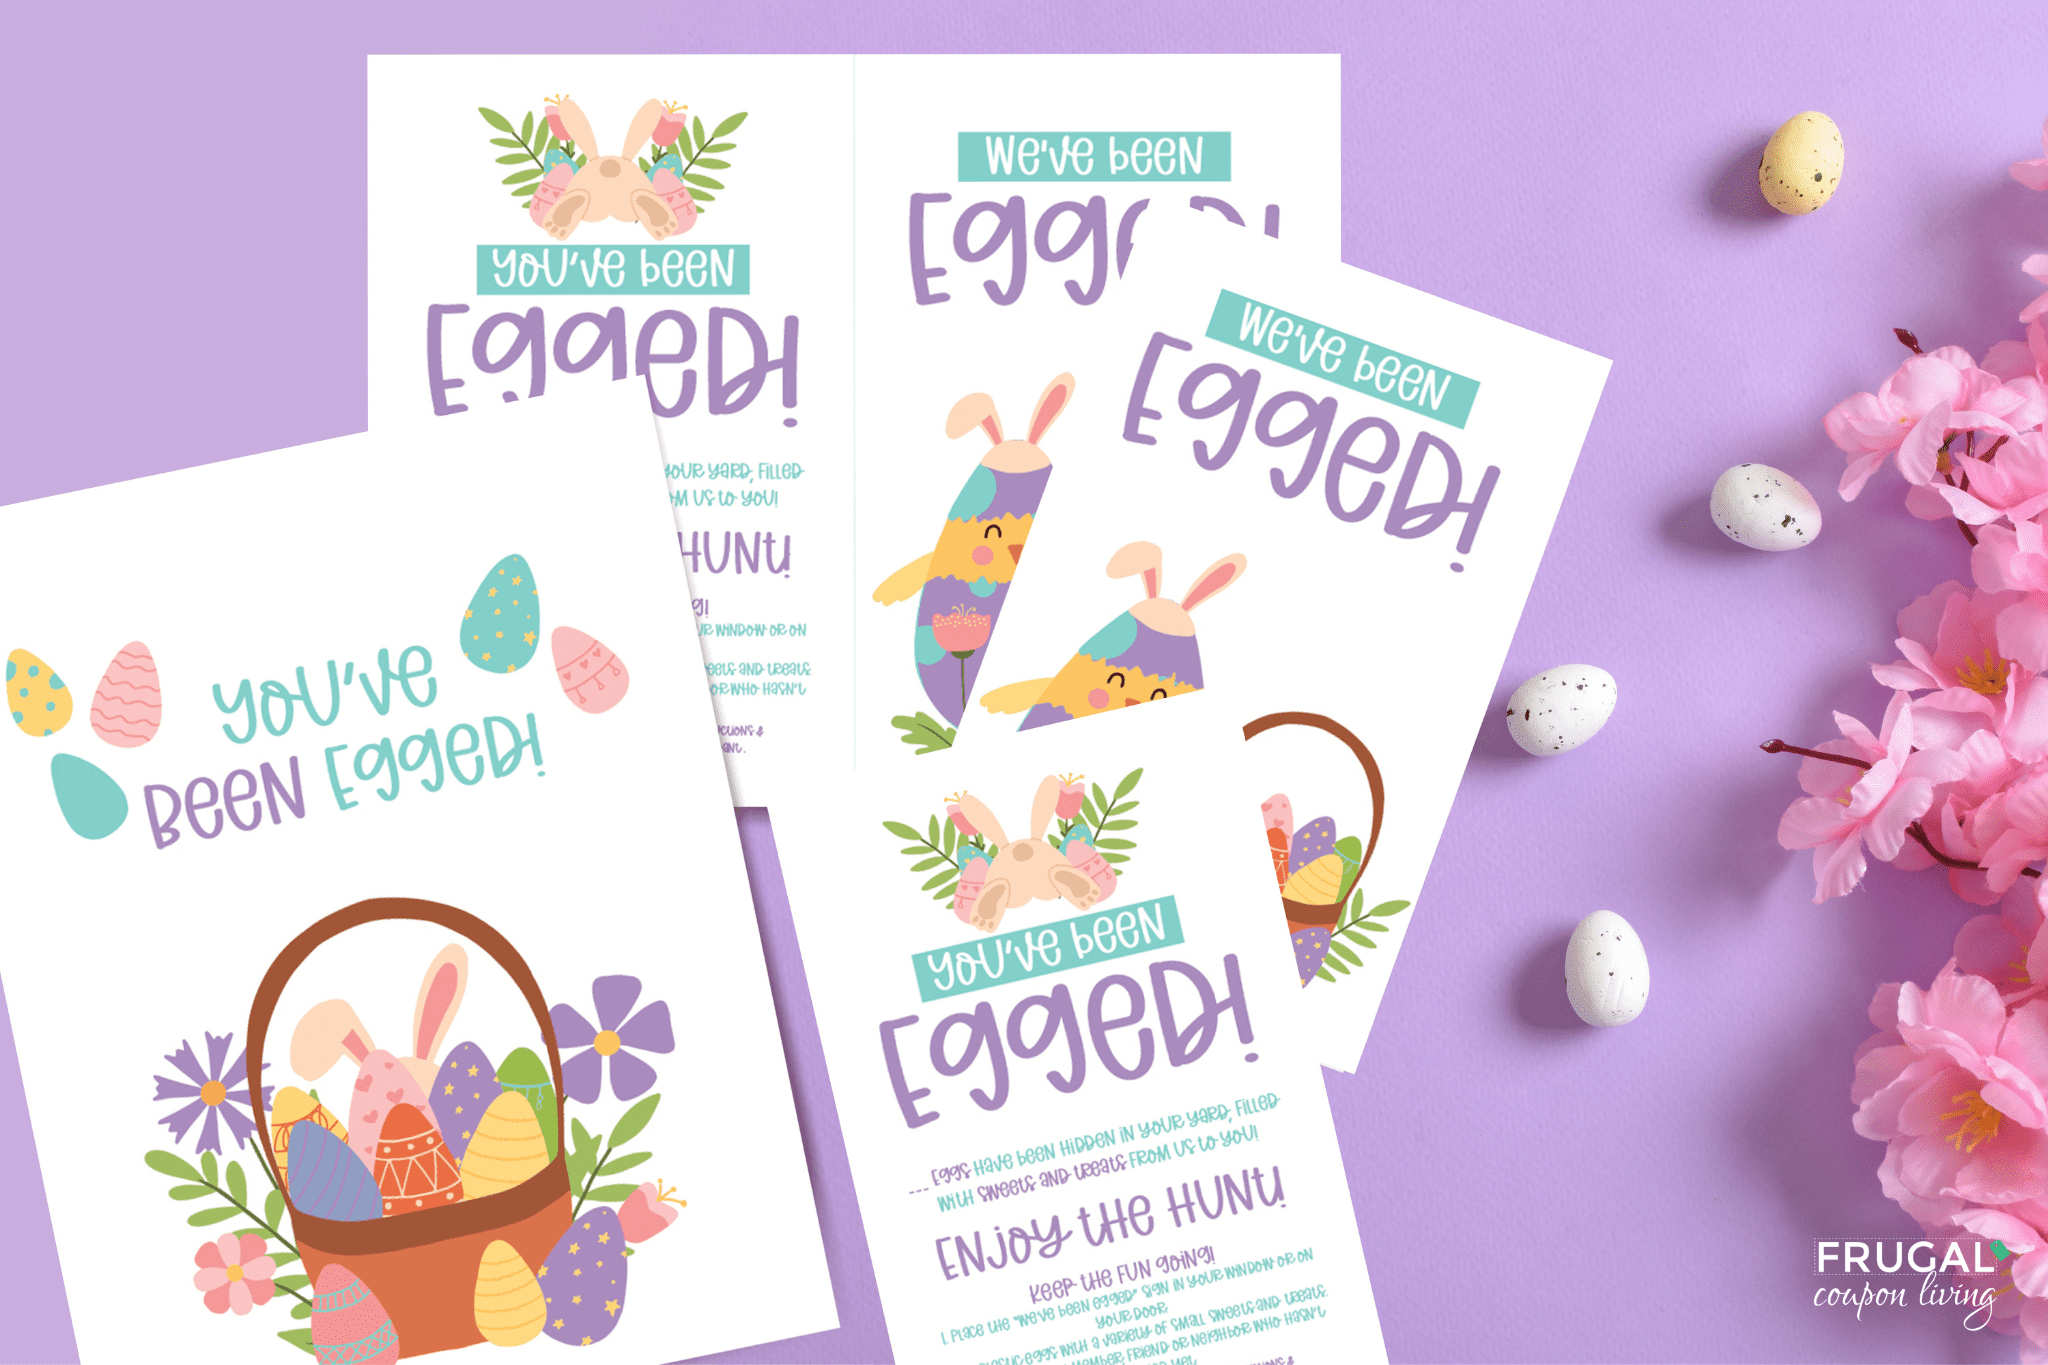 you've been egged easter tradition printable activity 